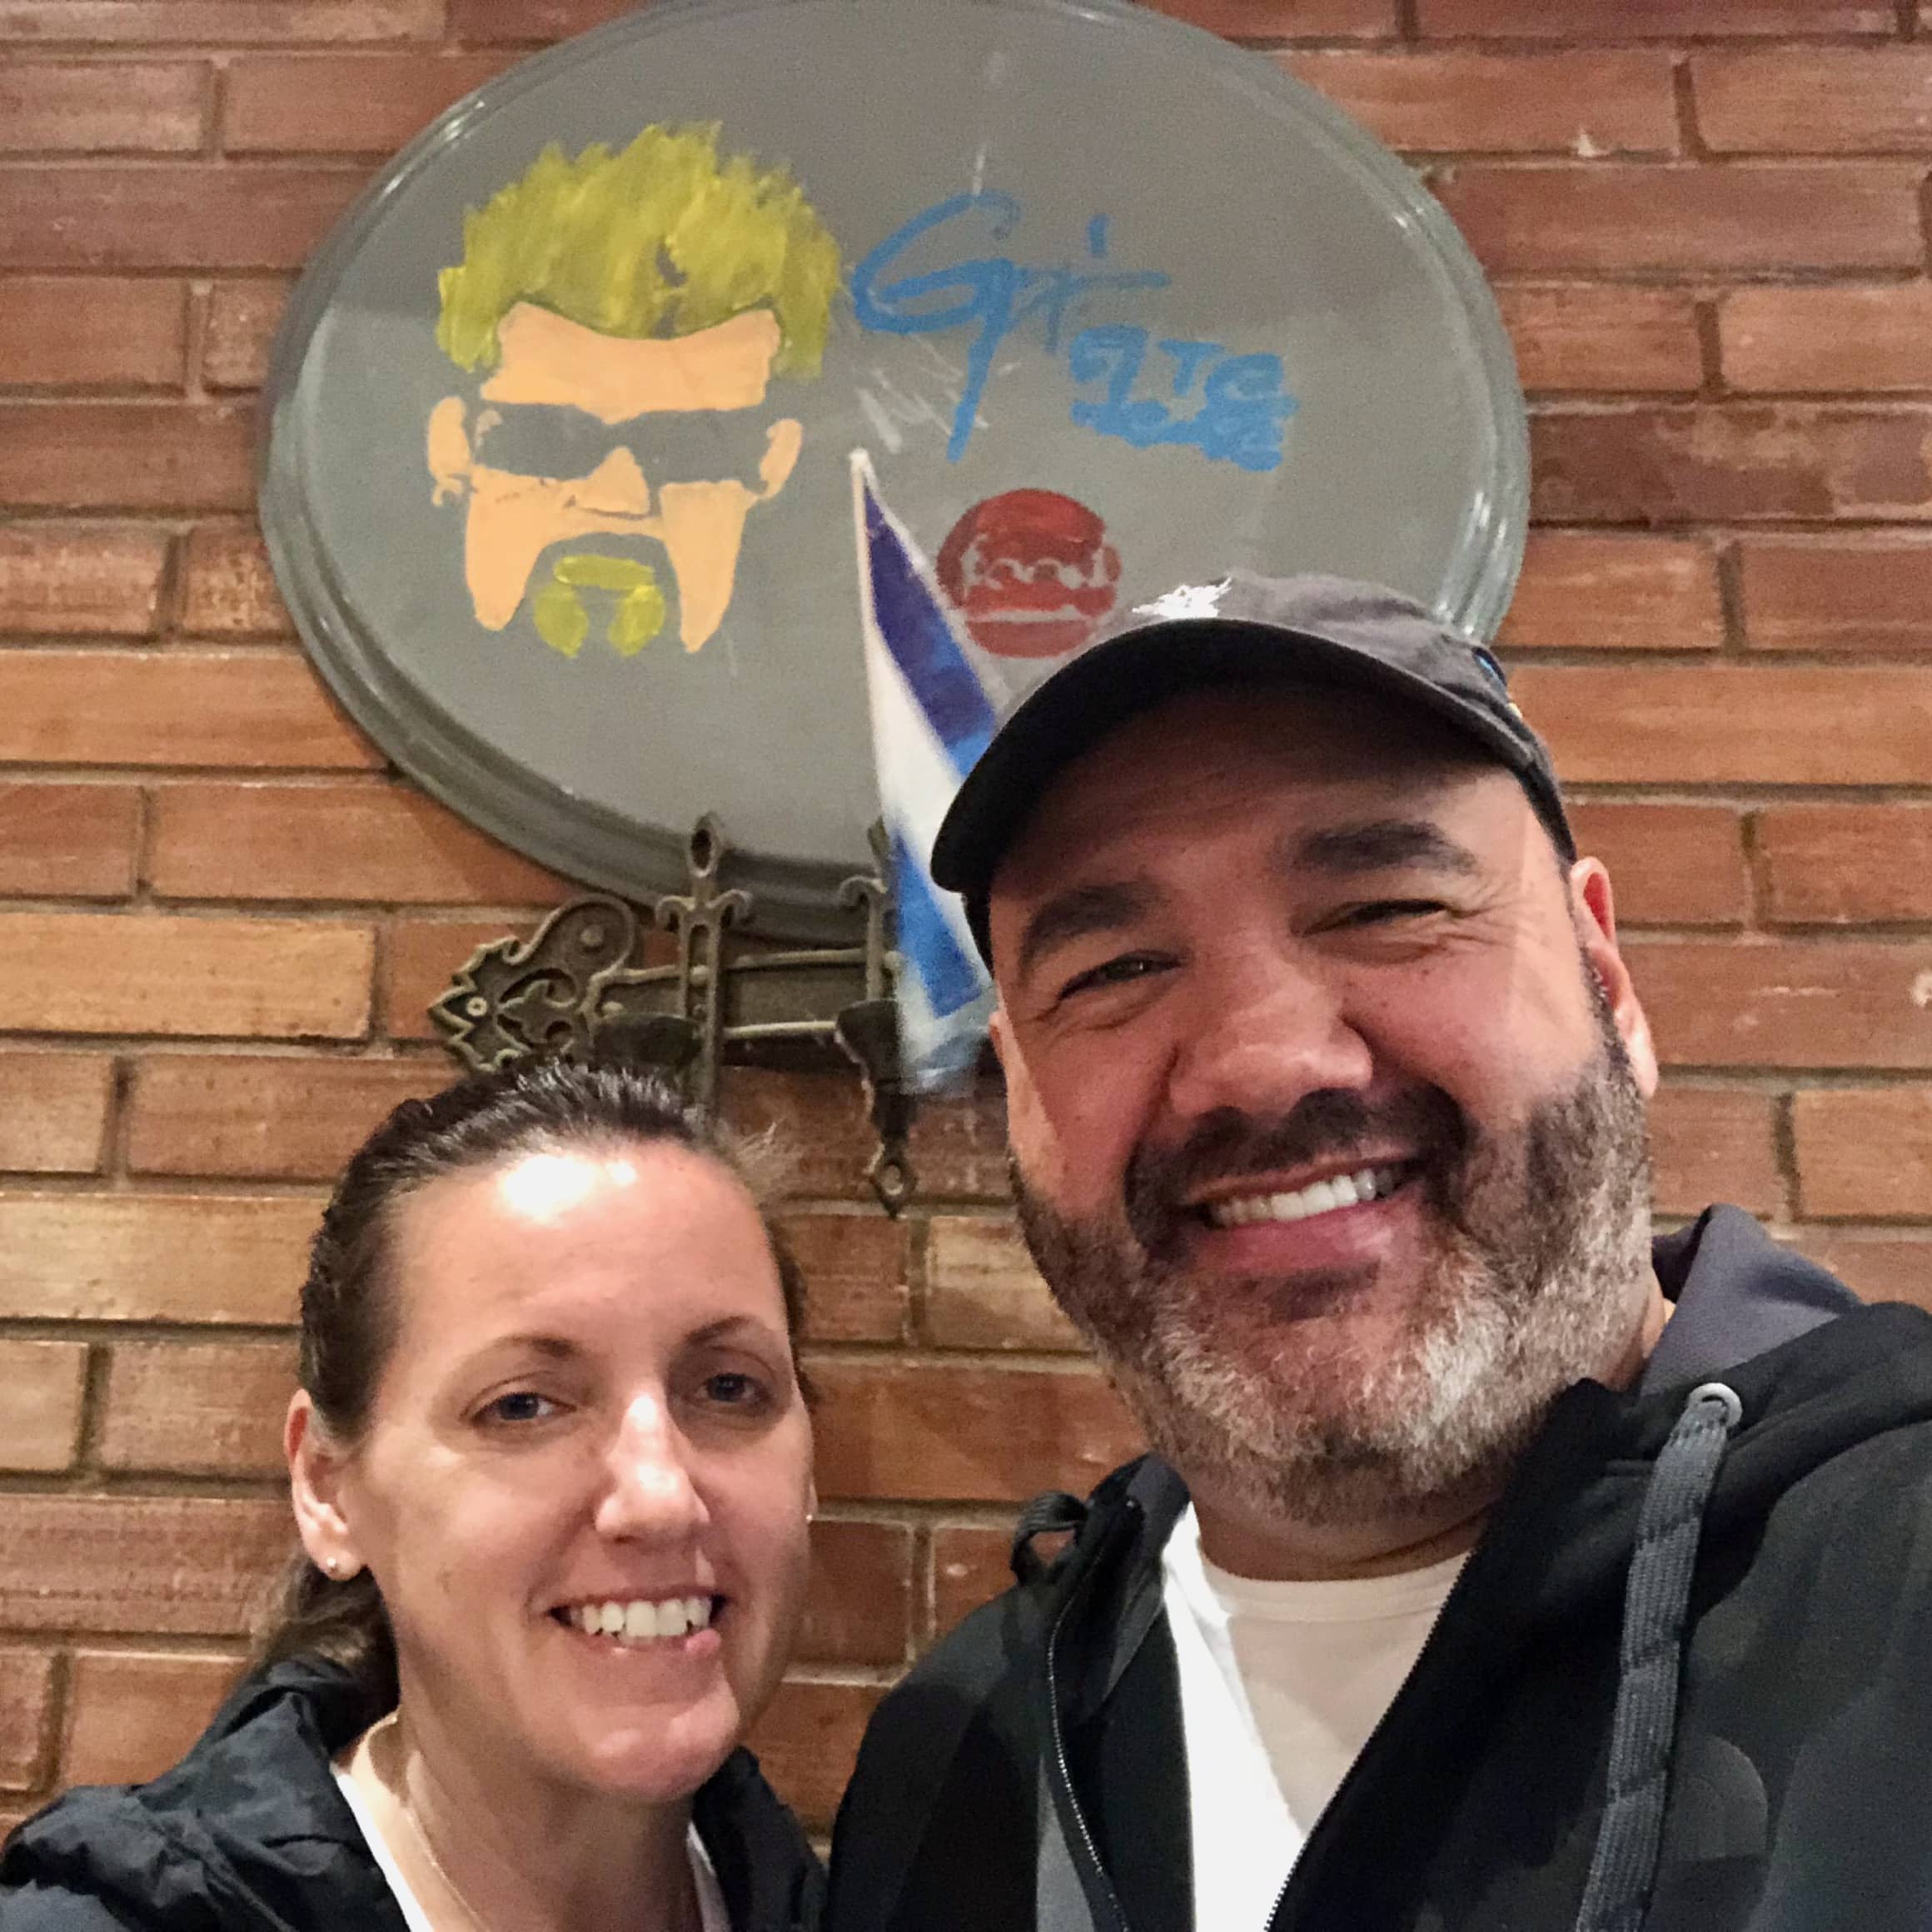 Rick and Jenn in Cuba for Diners Drive-ins and Dives